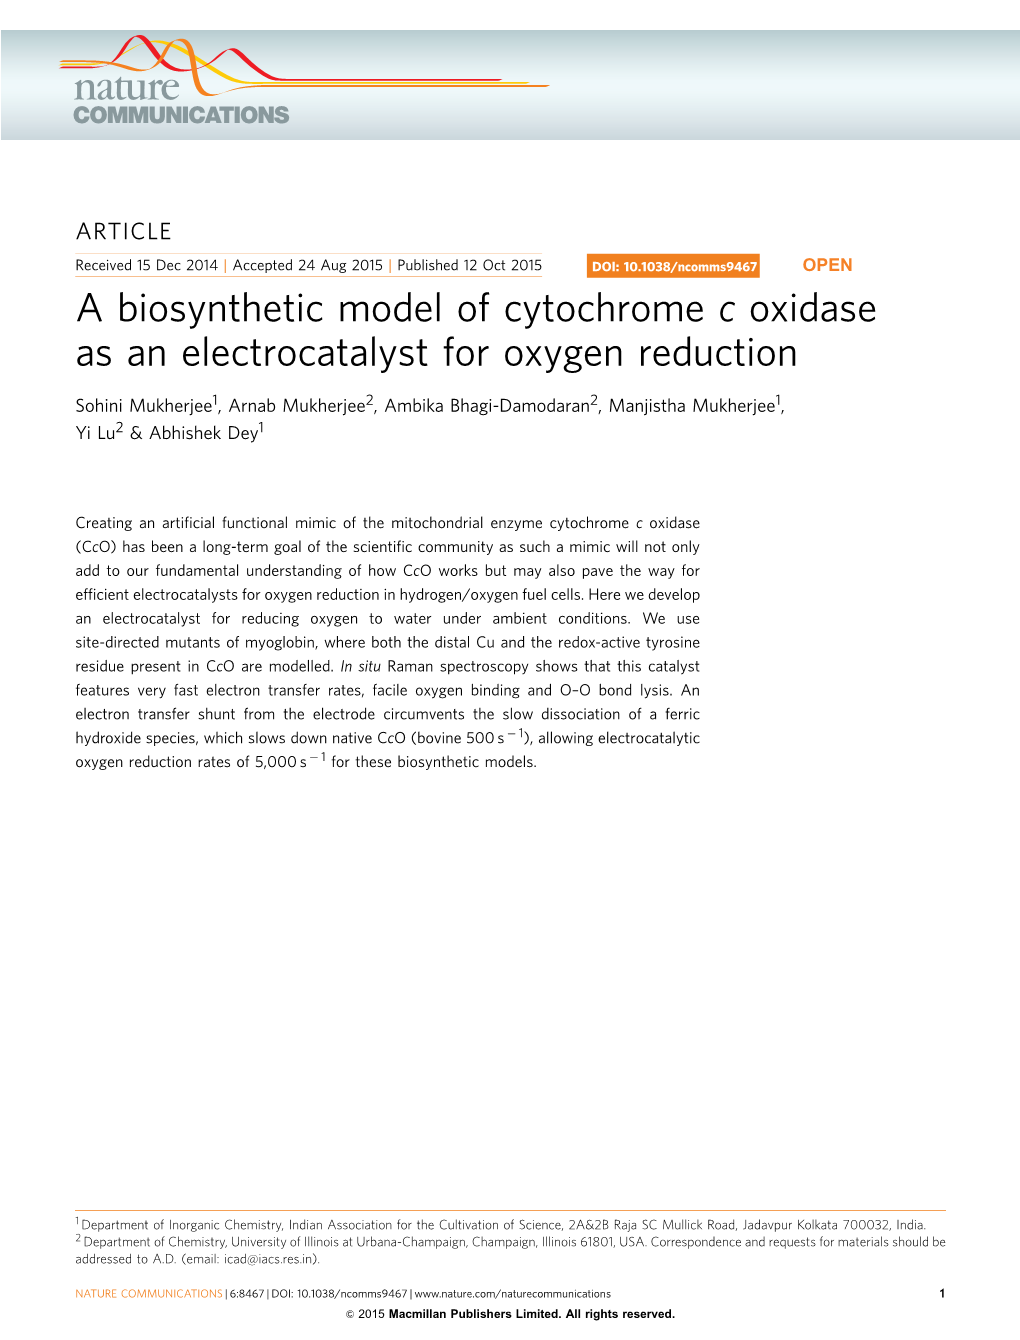 A Biosynthetic Model of Cytochrome C Oxidase As an Electrocatalyst for Oxygen Reduction